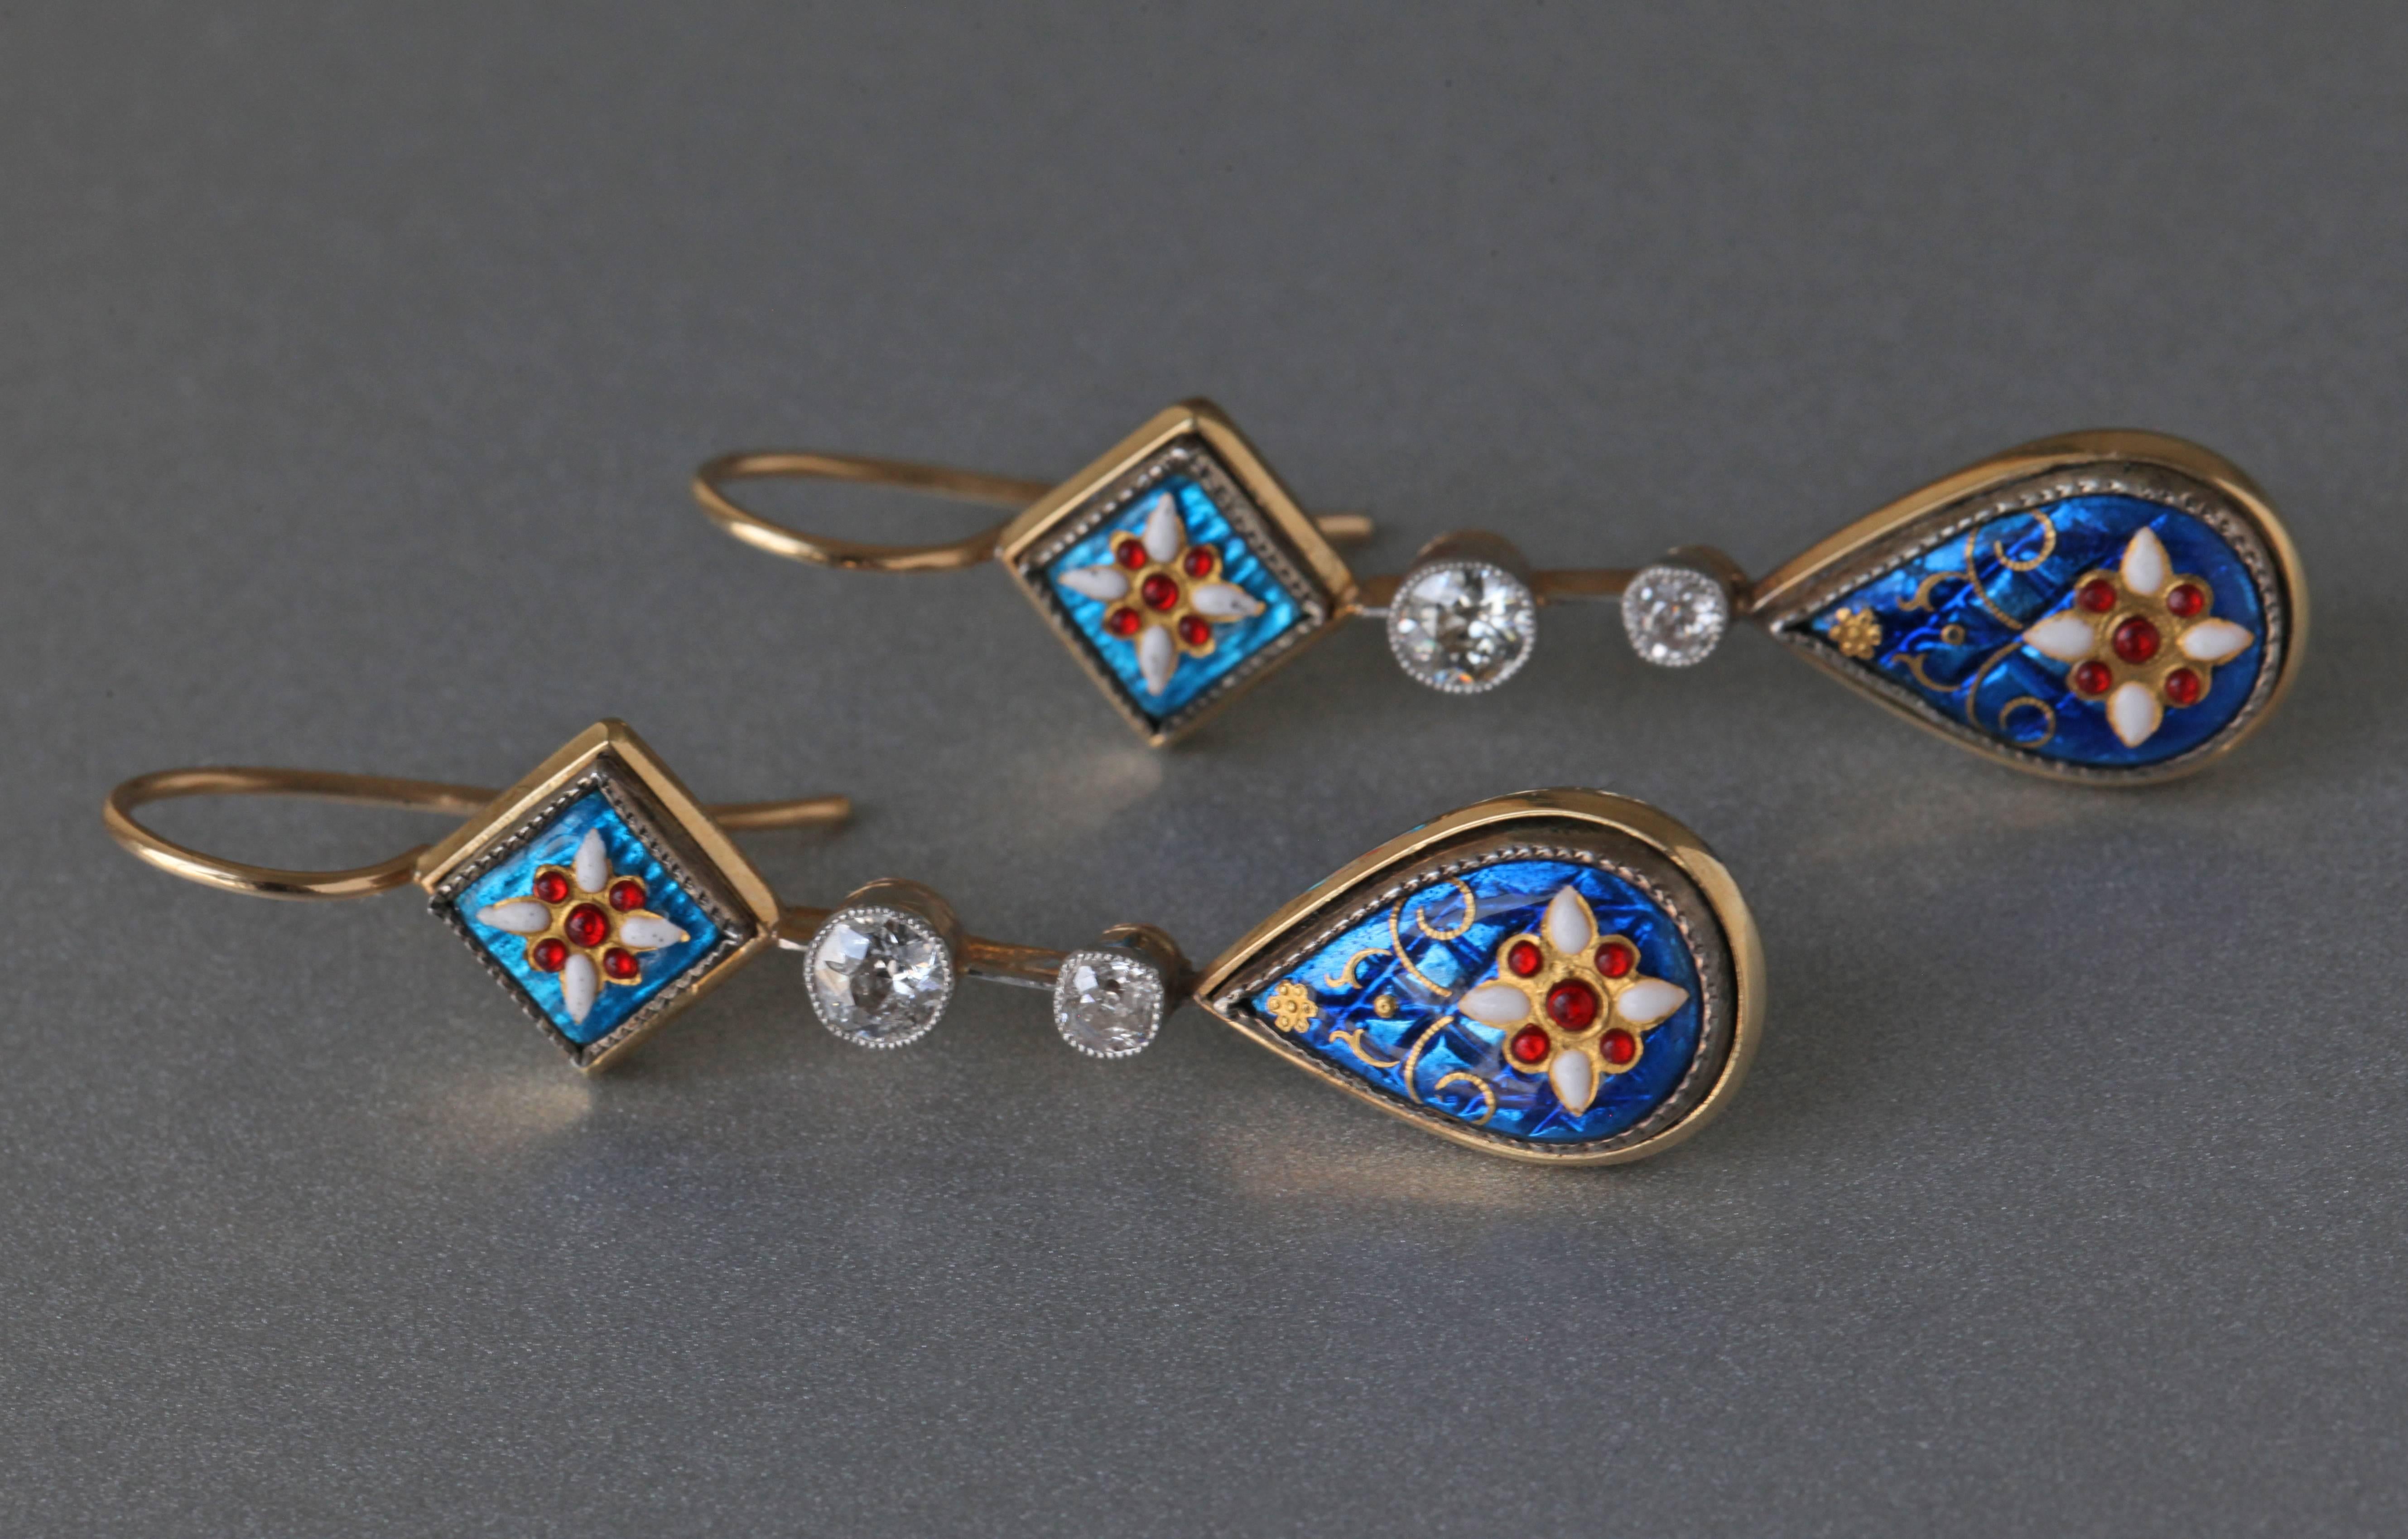 These exquisite gold and diamond drop earrings with their ciel bleu enamel were typically made in the French city of Bourg en Bresse. Old cut diamonds 0.75 cts approx.

H  5.00 cm (1.97 in)    W  1.20 cm (0.47 in)

Origin: France, c. 1890
Case: